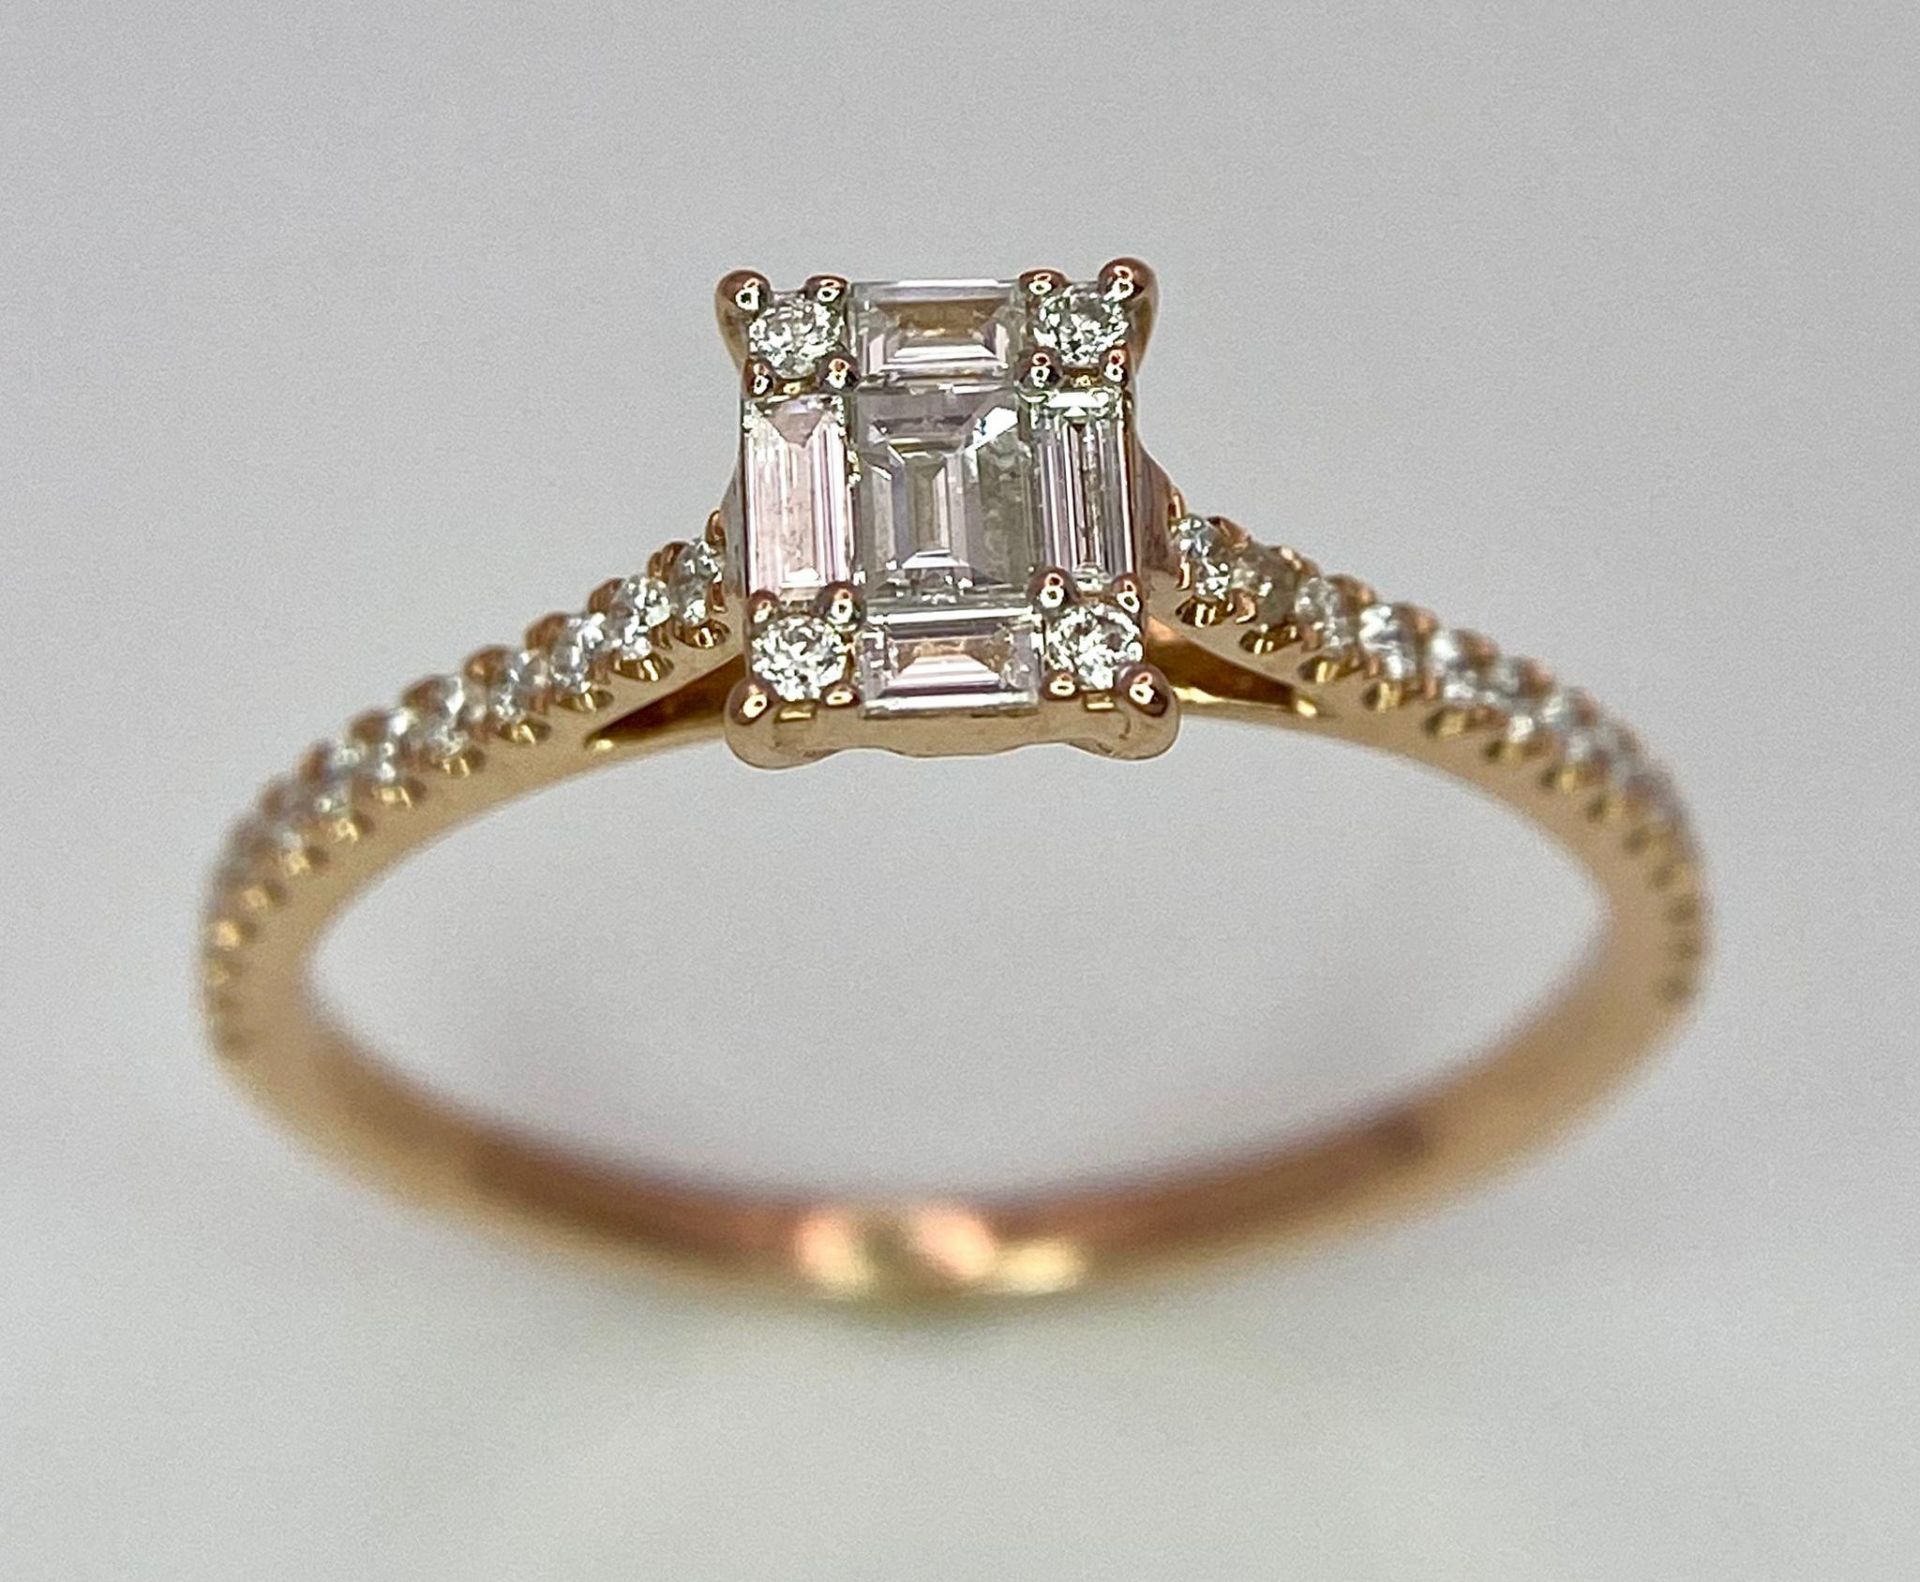 An 18 K rose gold ring with a square emerald cut diamond and more round cut diamonds on the - Image 2 of 8